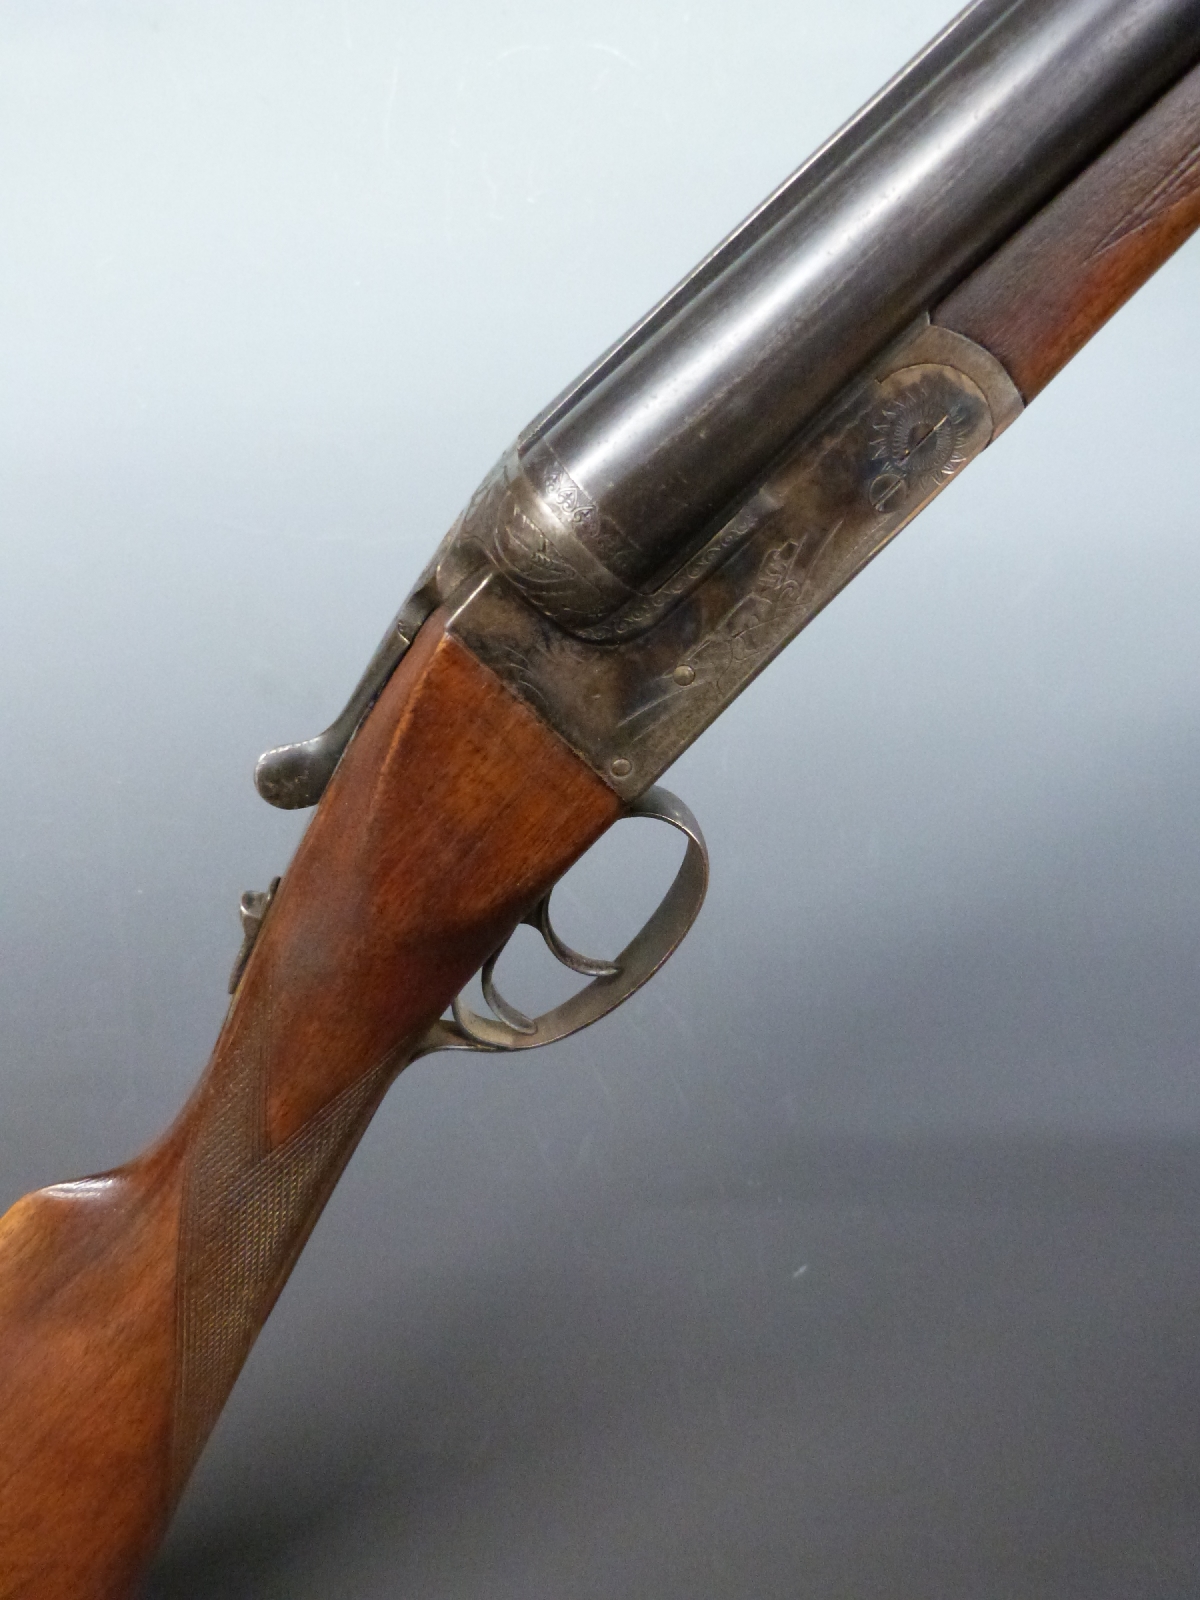 Essex 12 bore side by side shotgun with engraved locks, trigger guard underside and top plate,